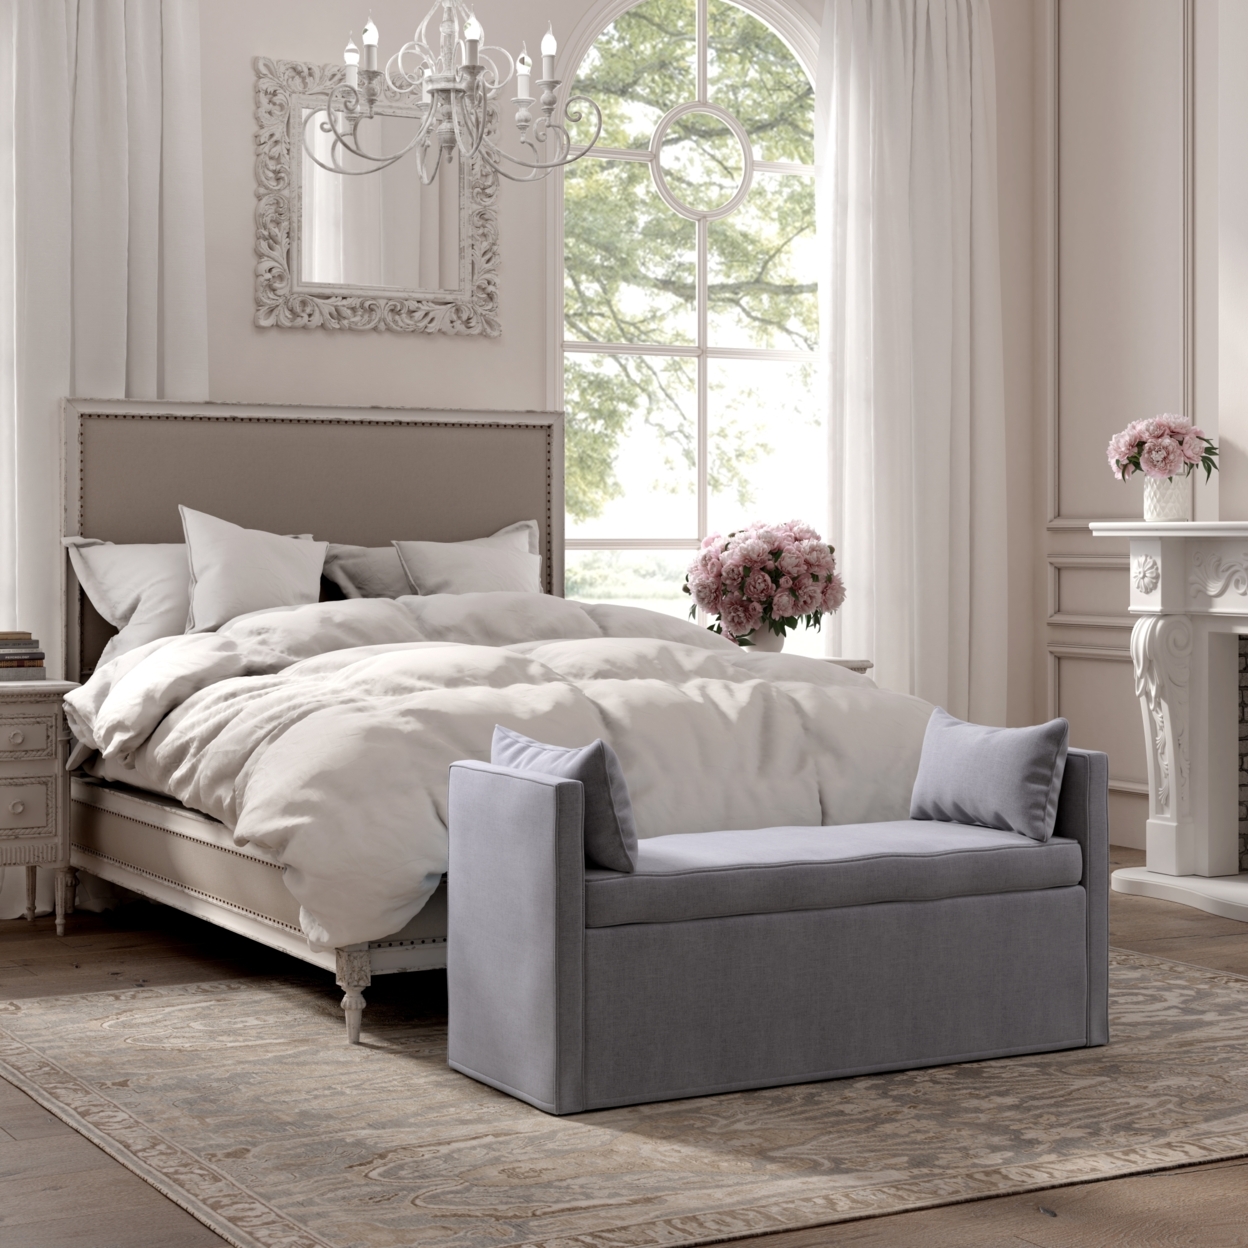 Persephone Bench-Upholstered-Piping Details-Two Pillows - Light Grey